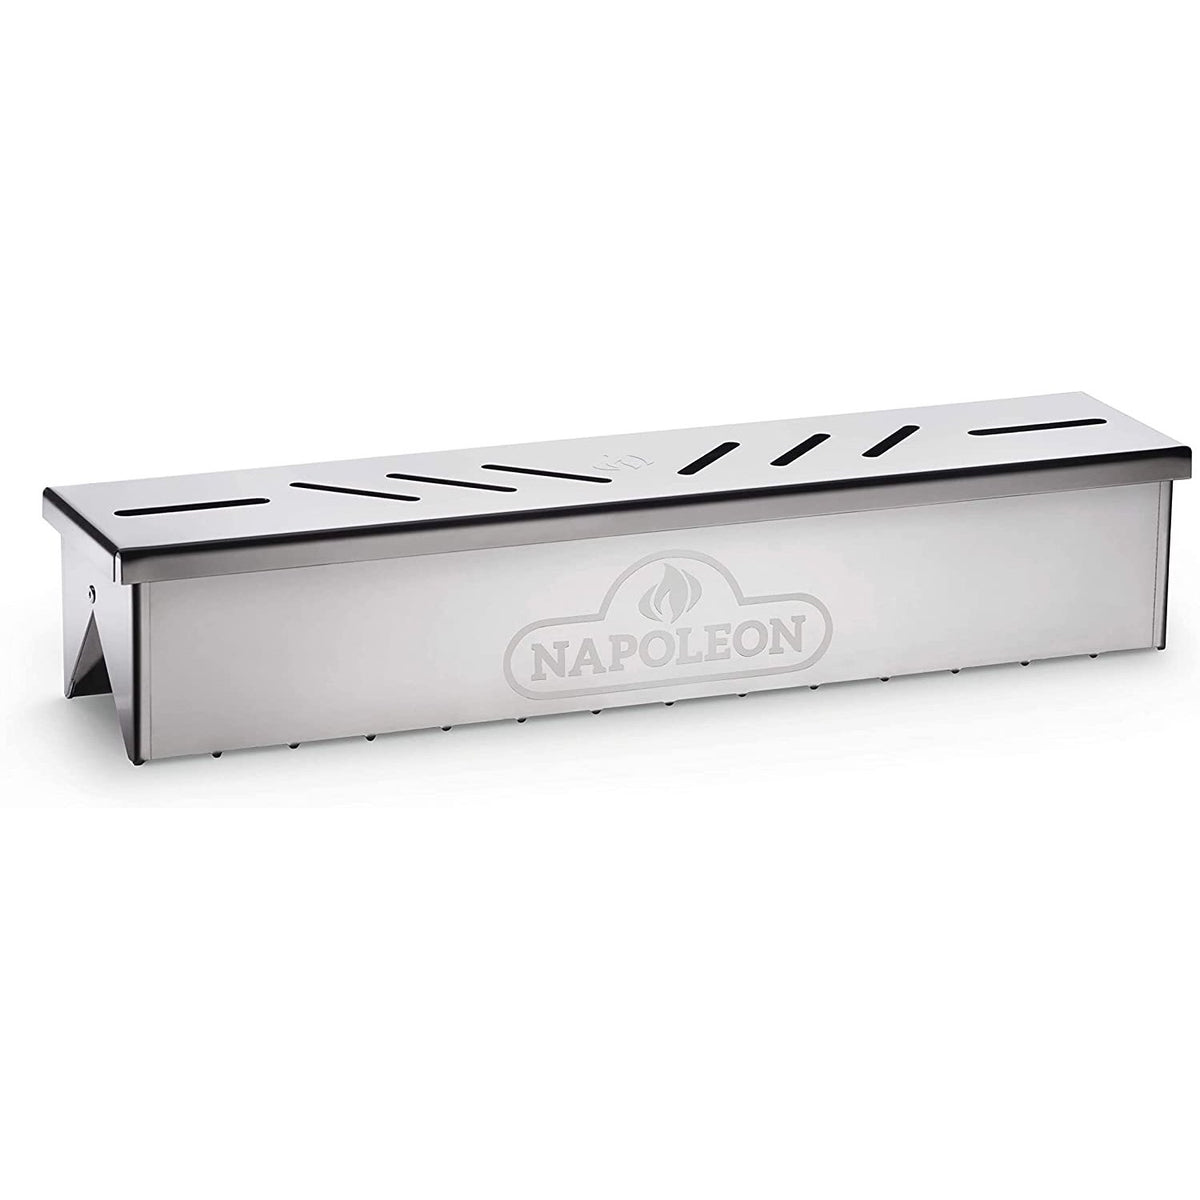 Napoleon Stainless Steel Smoker Box for Prestige/Prestige PRO/Rogue Series Gas Grills (works with weber) for $18.99 w/ free shipping